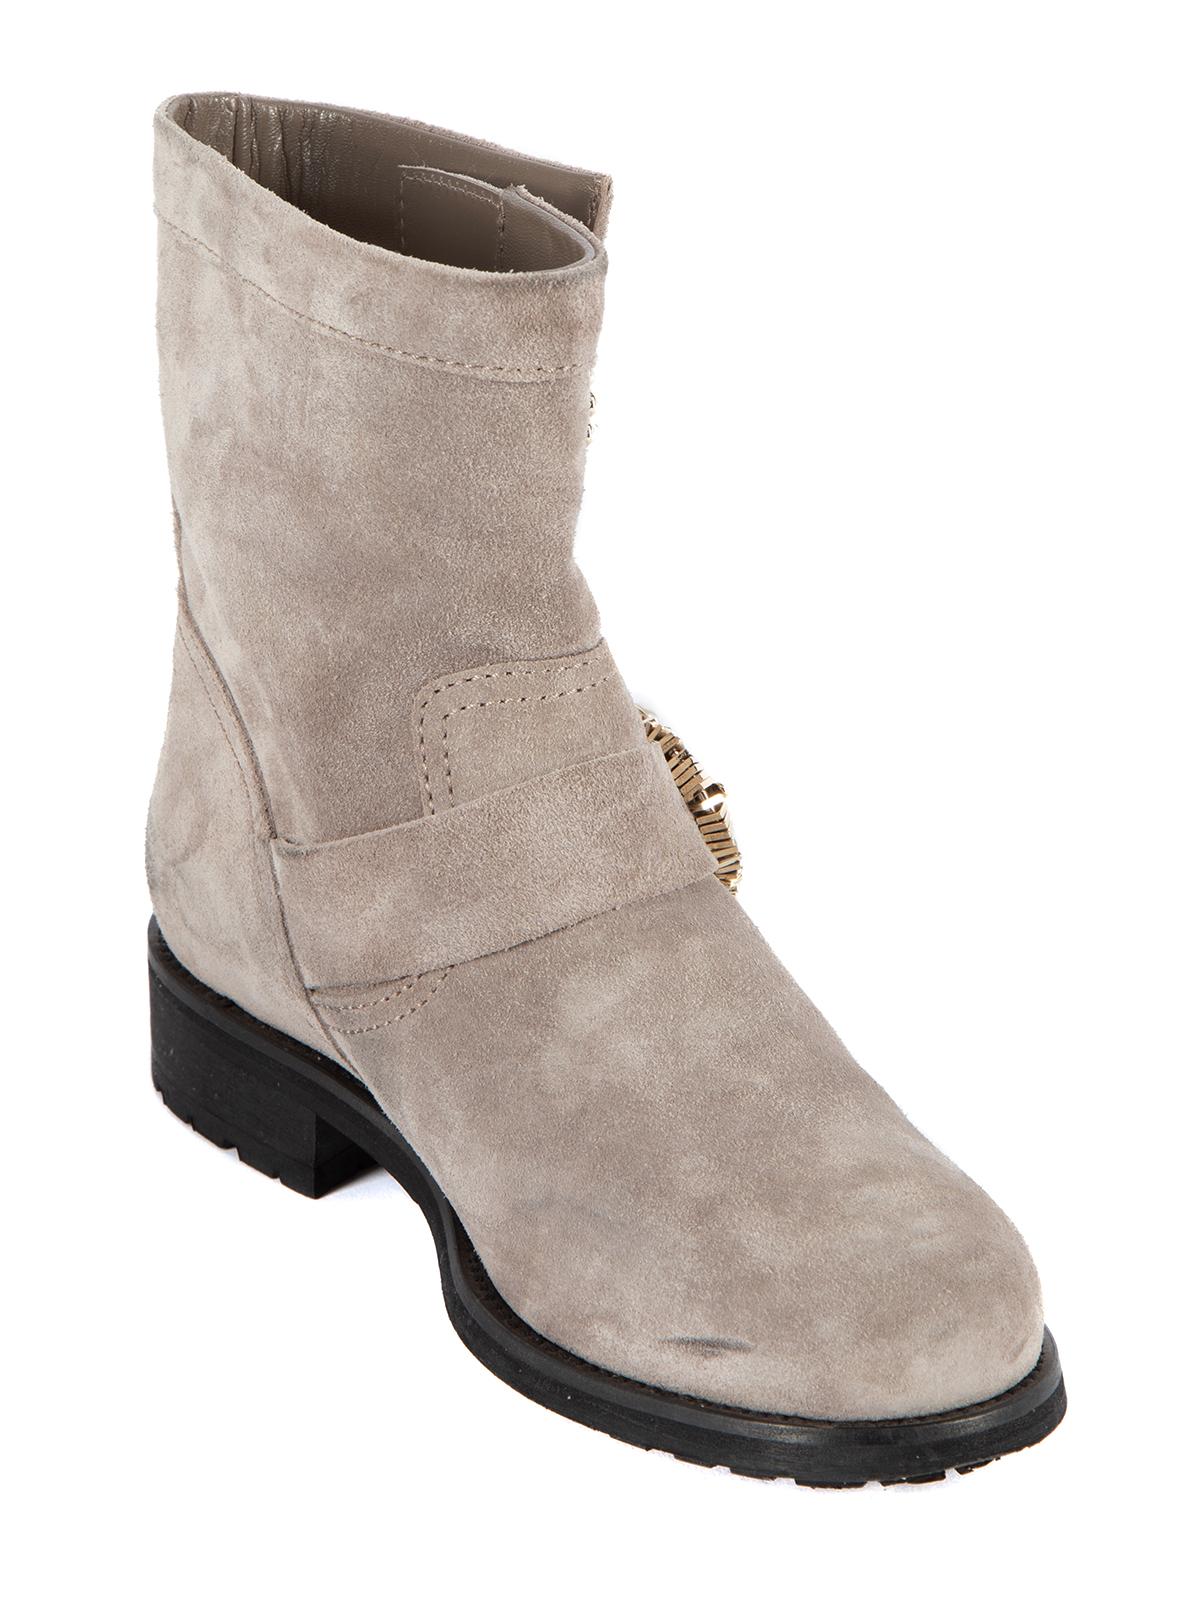 CONDITION is Very good. Minimal wear to boots is evident. Minimal wear to suede exterior where stains can be seen on this used Jimmy Choo designer resale item. Details Grey Suede Ankle boot Embellished details Slip on and buckle fastening Brand name